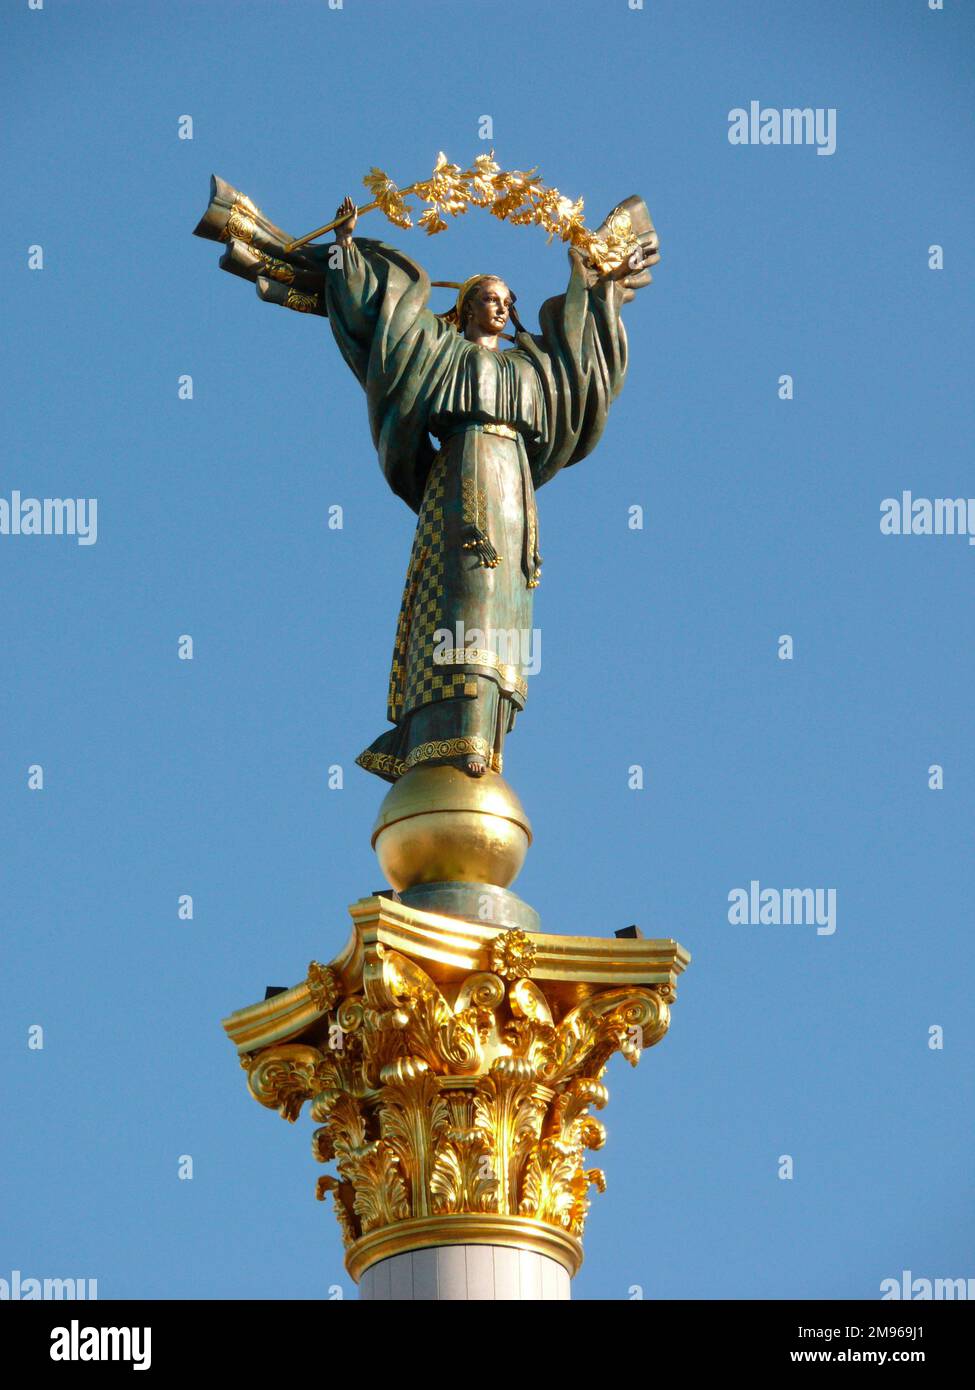 Close-up view of the figure on top of the Pillar of Freedom (or Independence Pillar) in Independence Square (Maidan Nezalezhnosti), Kiev, Ukraine.  Ukraine gained its independence from Russia in 1991. Stock Photo